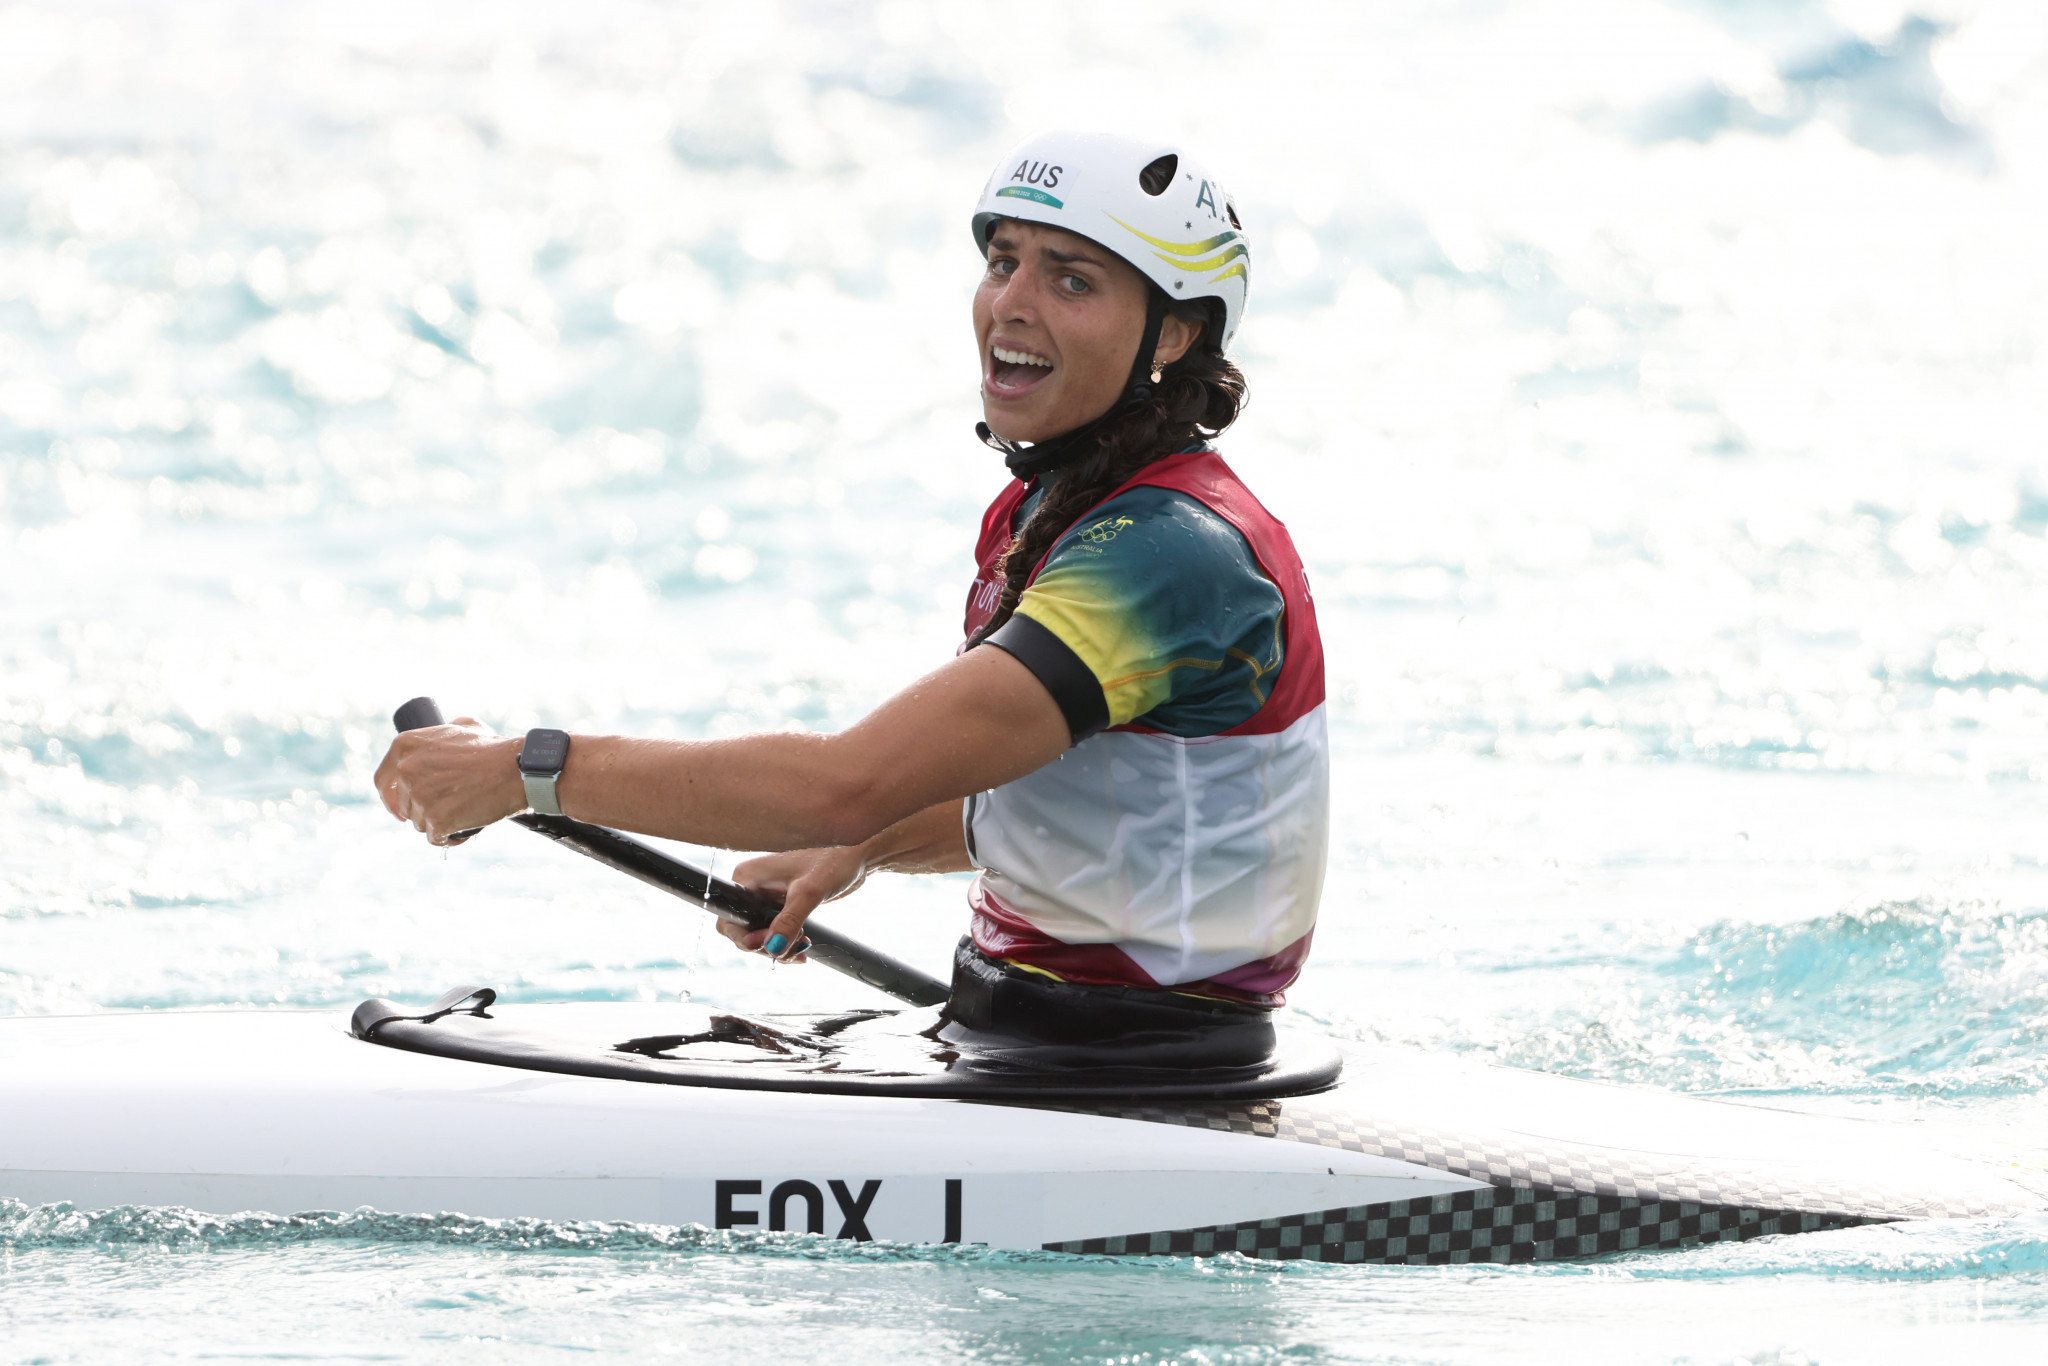 Fox bidding for further success at ICF Canoe Slalom World Cup in Kraków